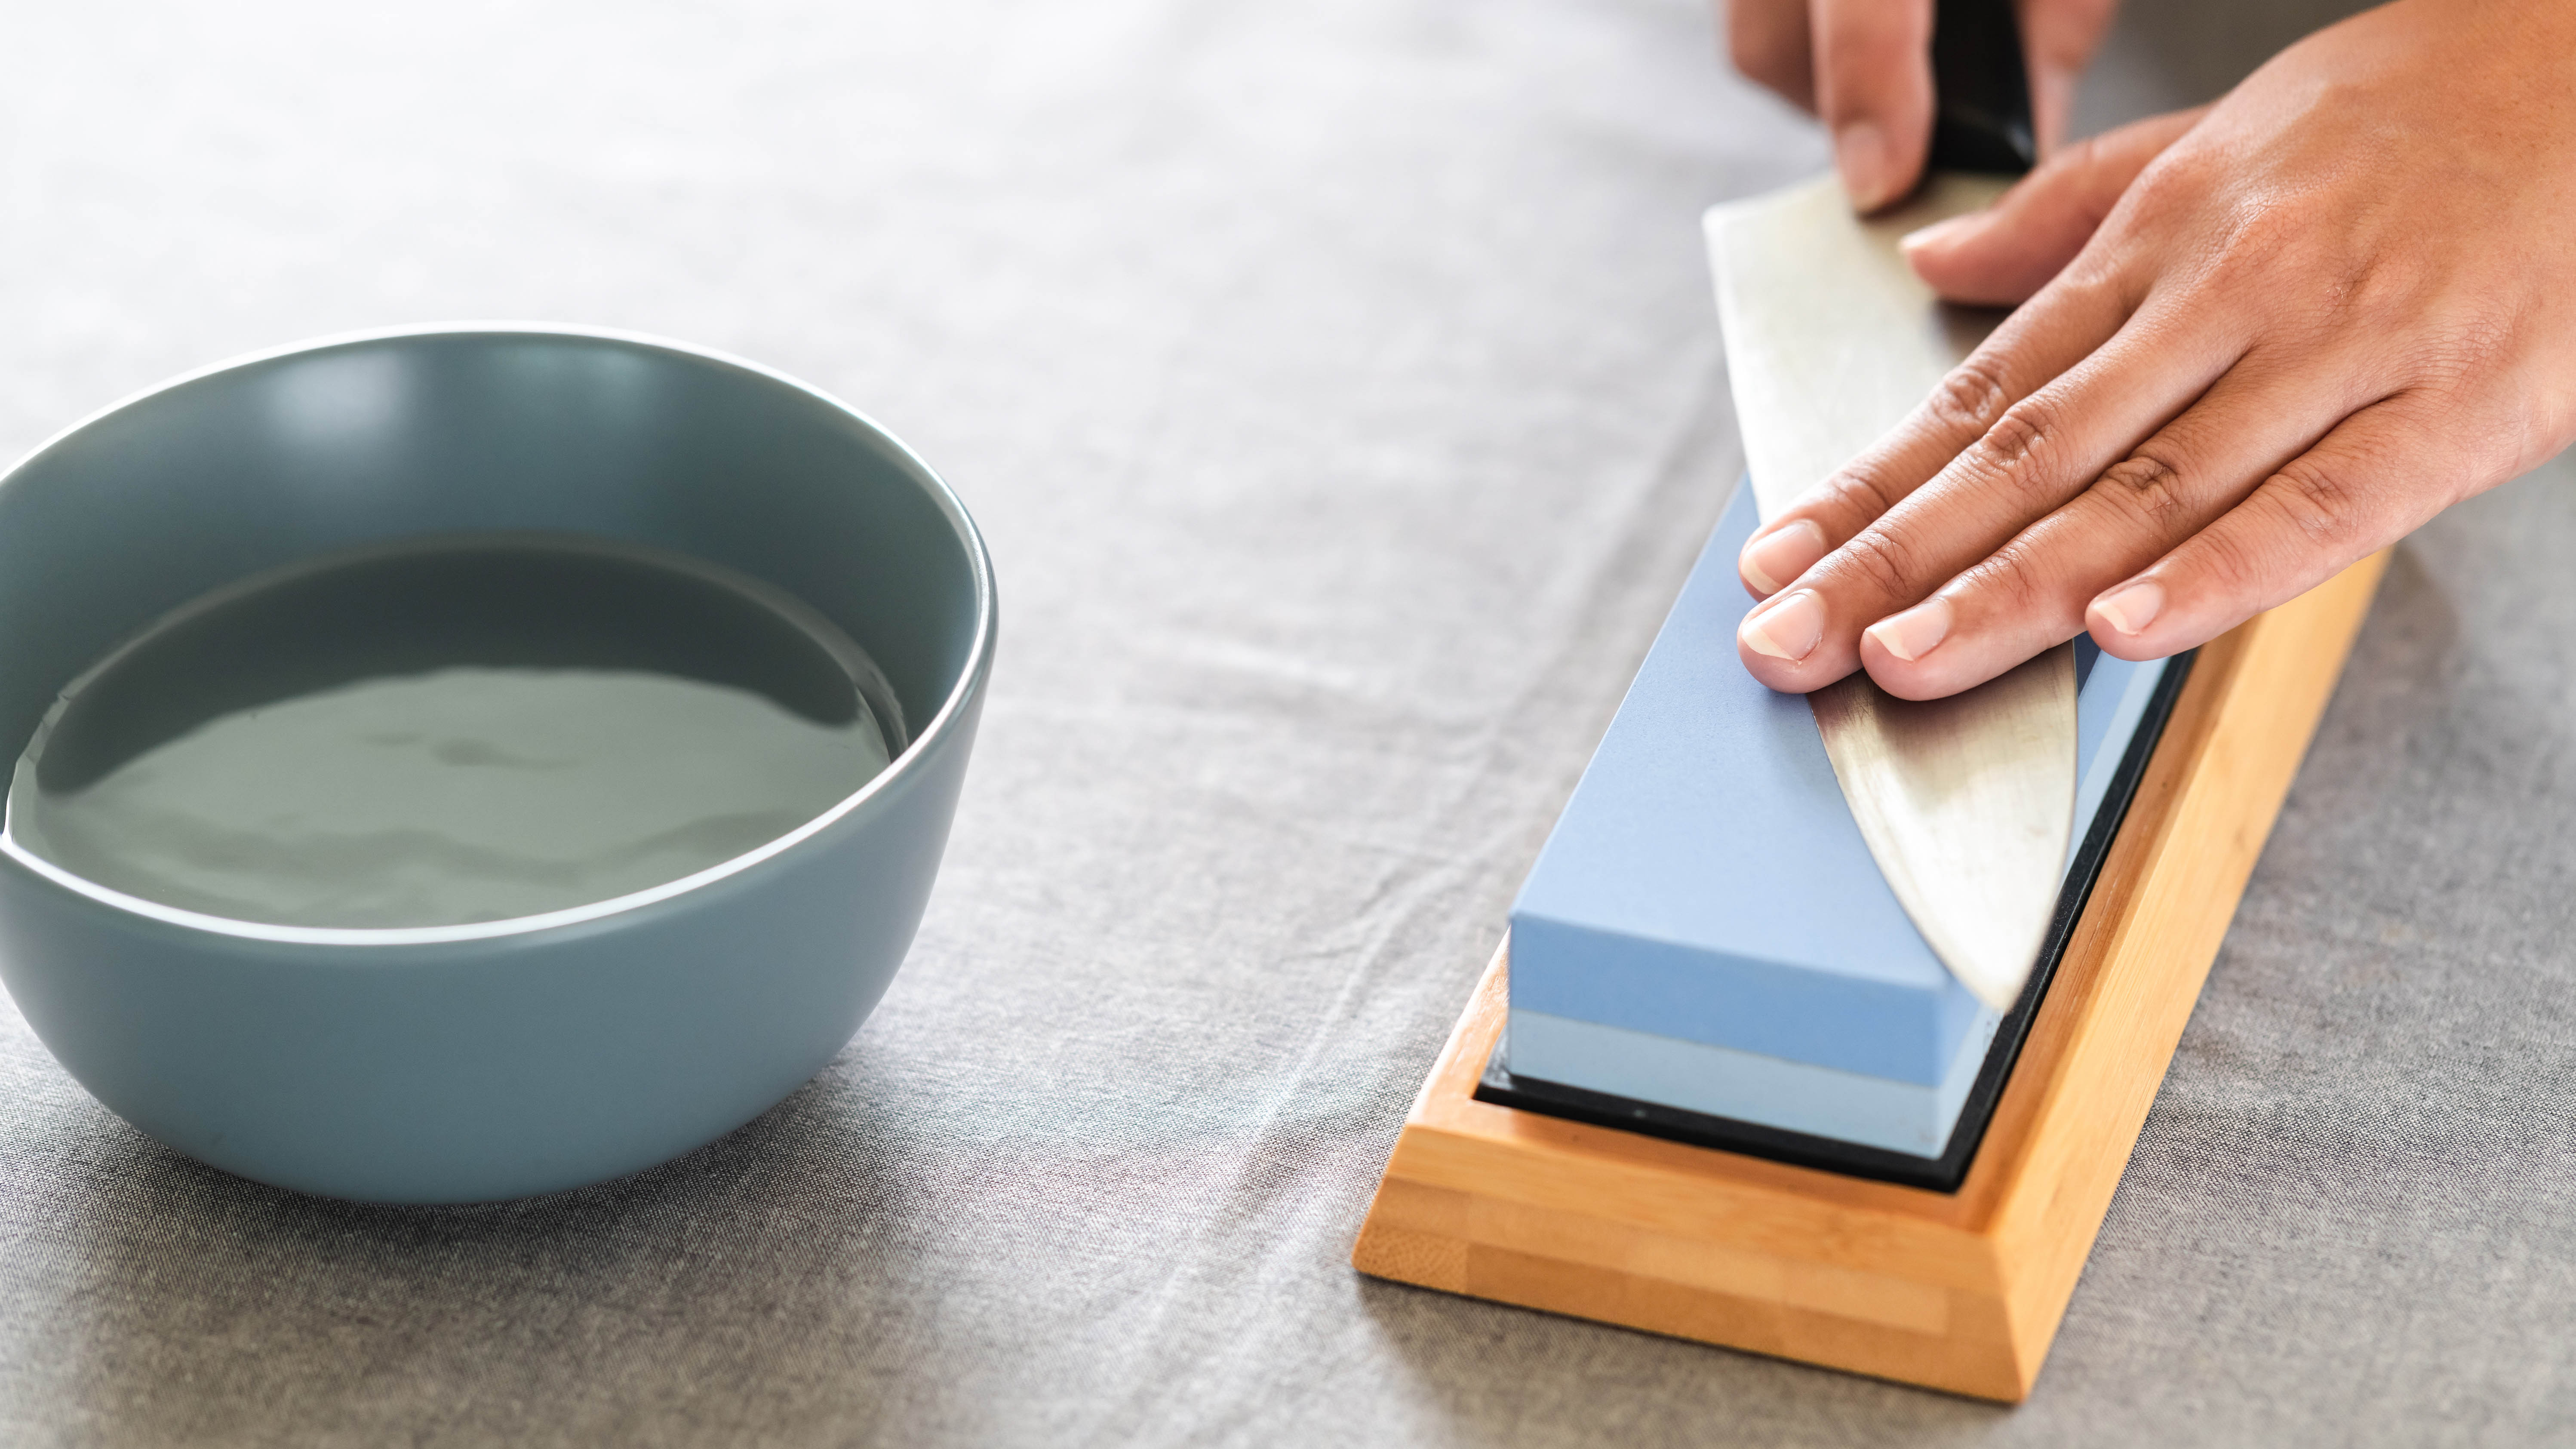 A knife sharpening on a whetstone next to a bowl of water